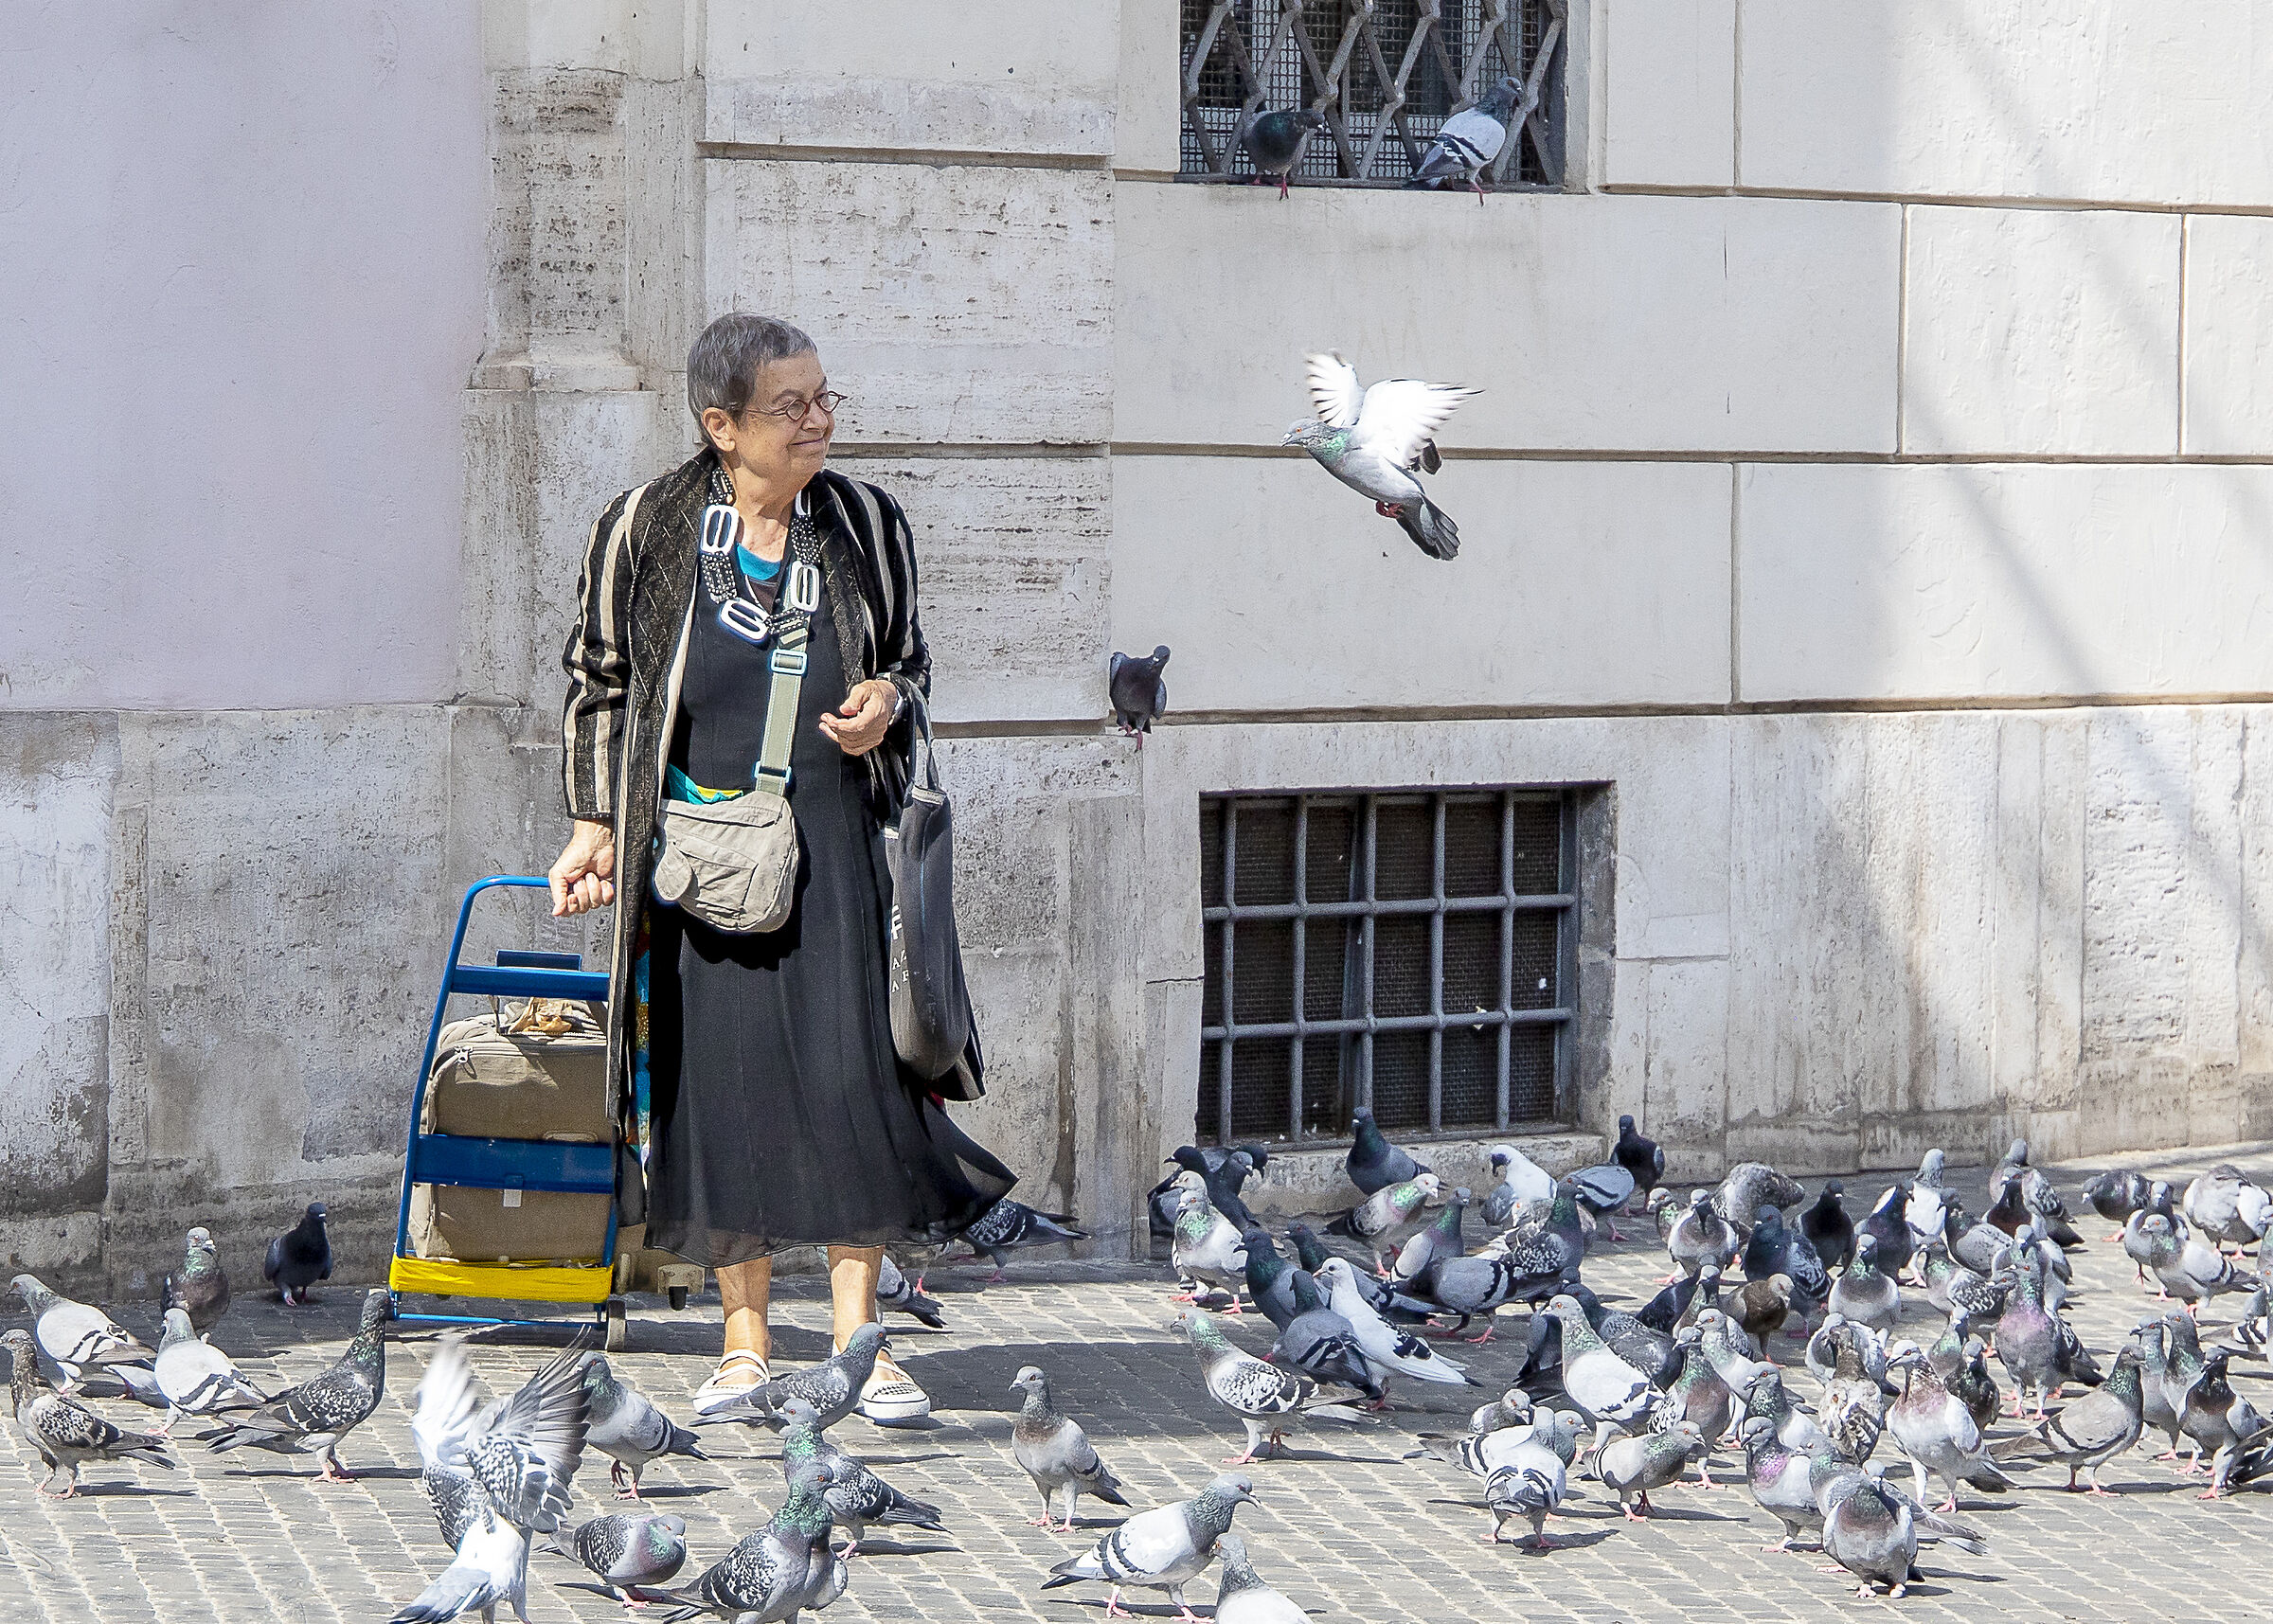 The Lady of the Pigeons......